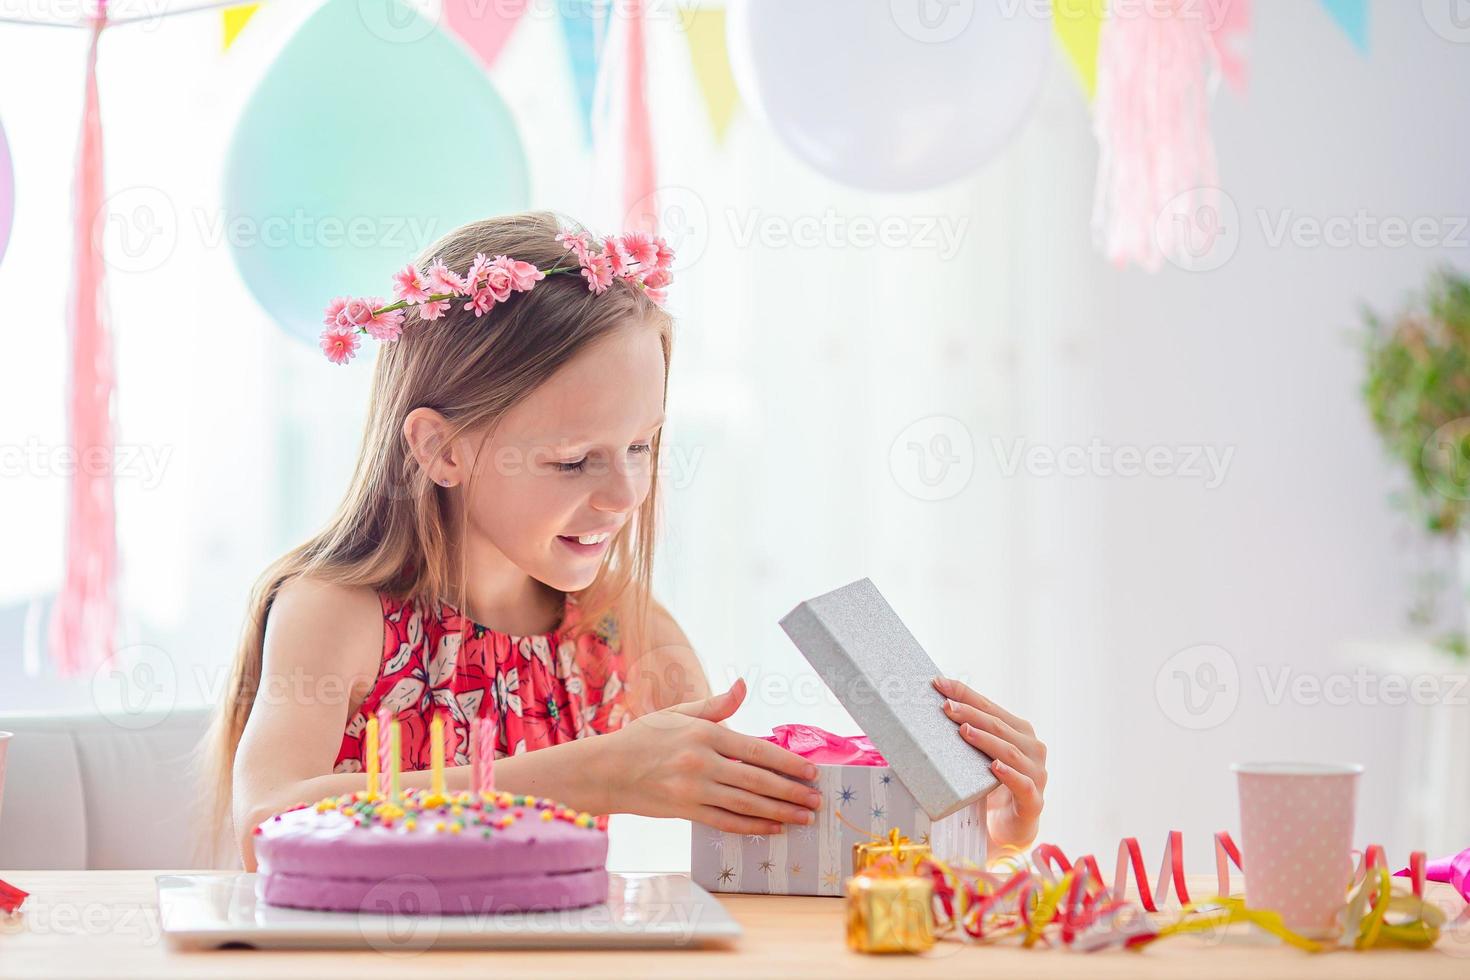 Caucasian girl at birthday. Festive colorful background with balloons. Birthday party and wishes concept. photo